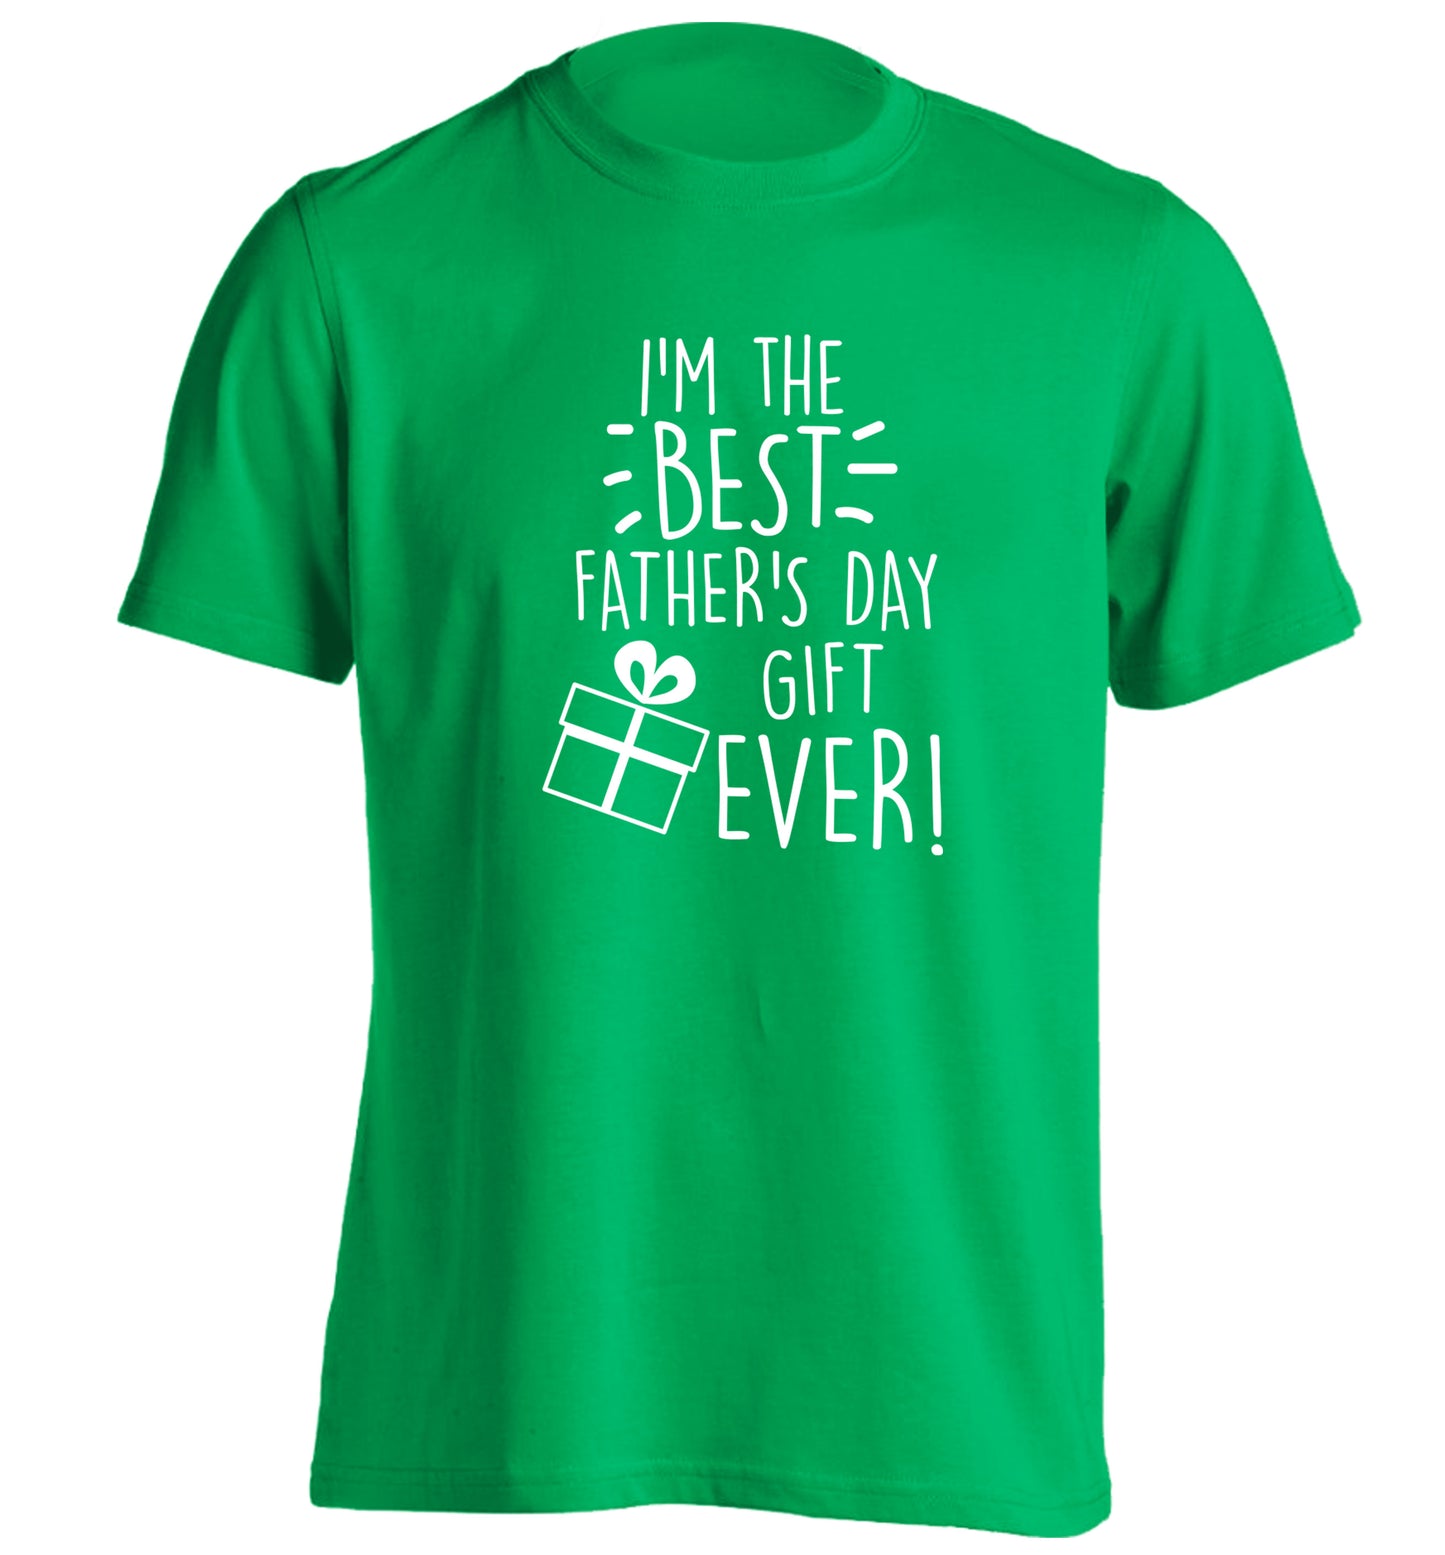 I'm the BEST father's day gift ever! adults unisex green Tshirt 2XL